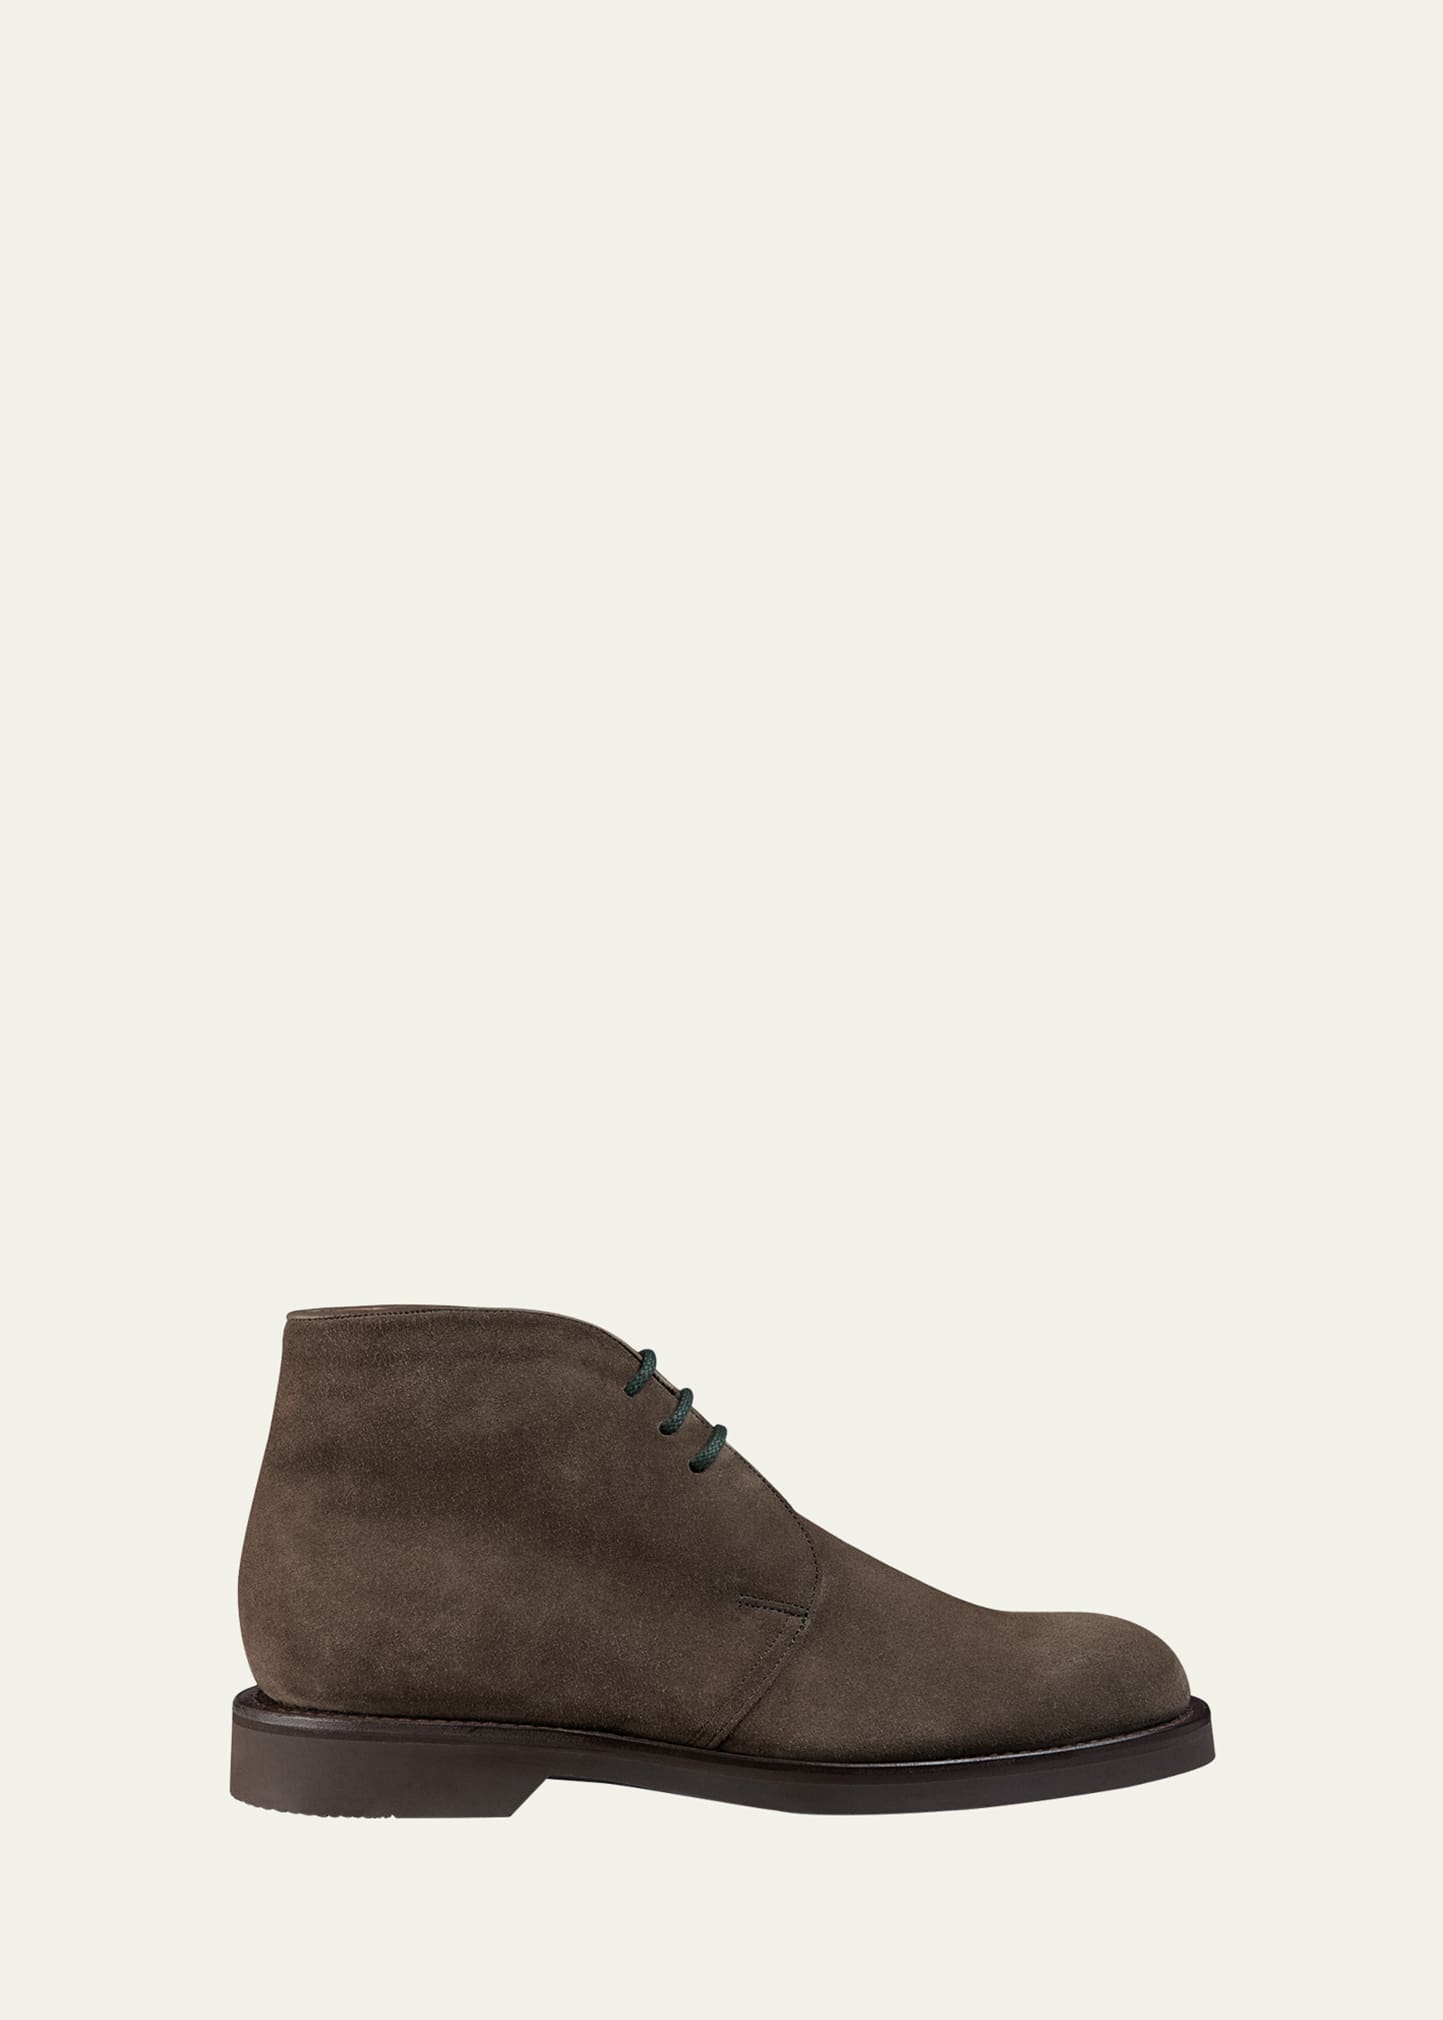 Men's Suede Lace-Up Chukka Boots